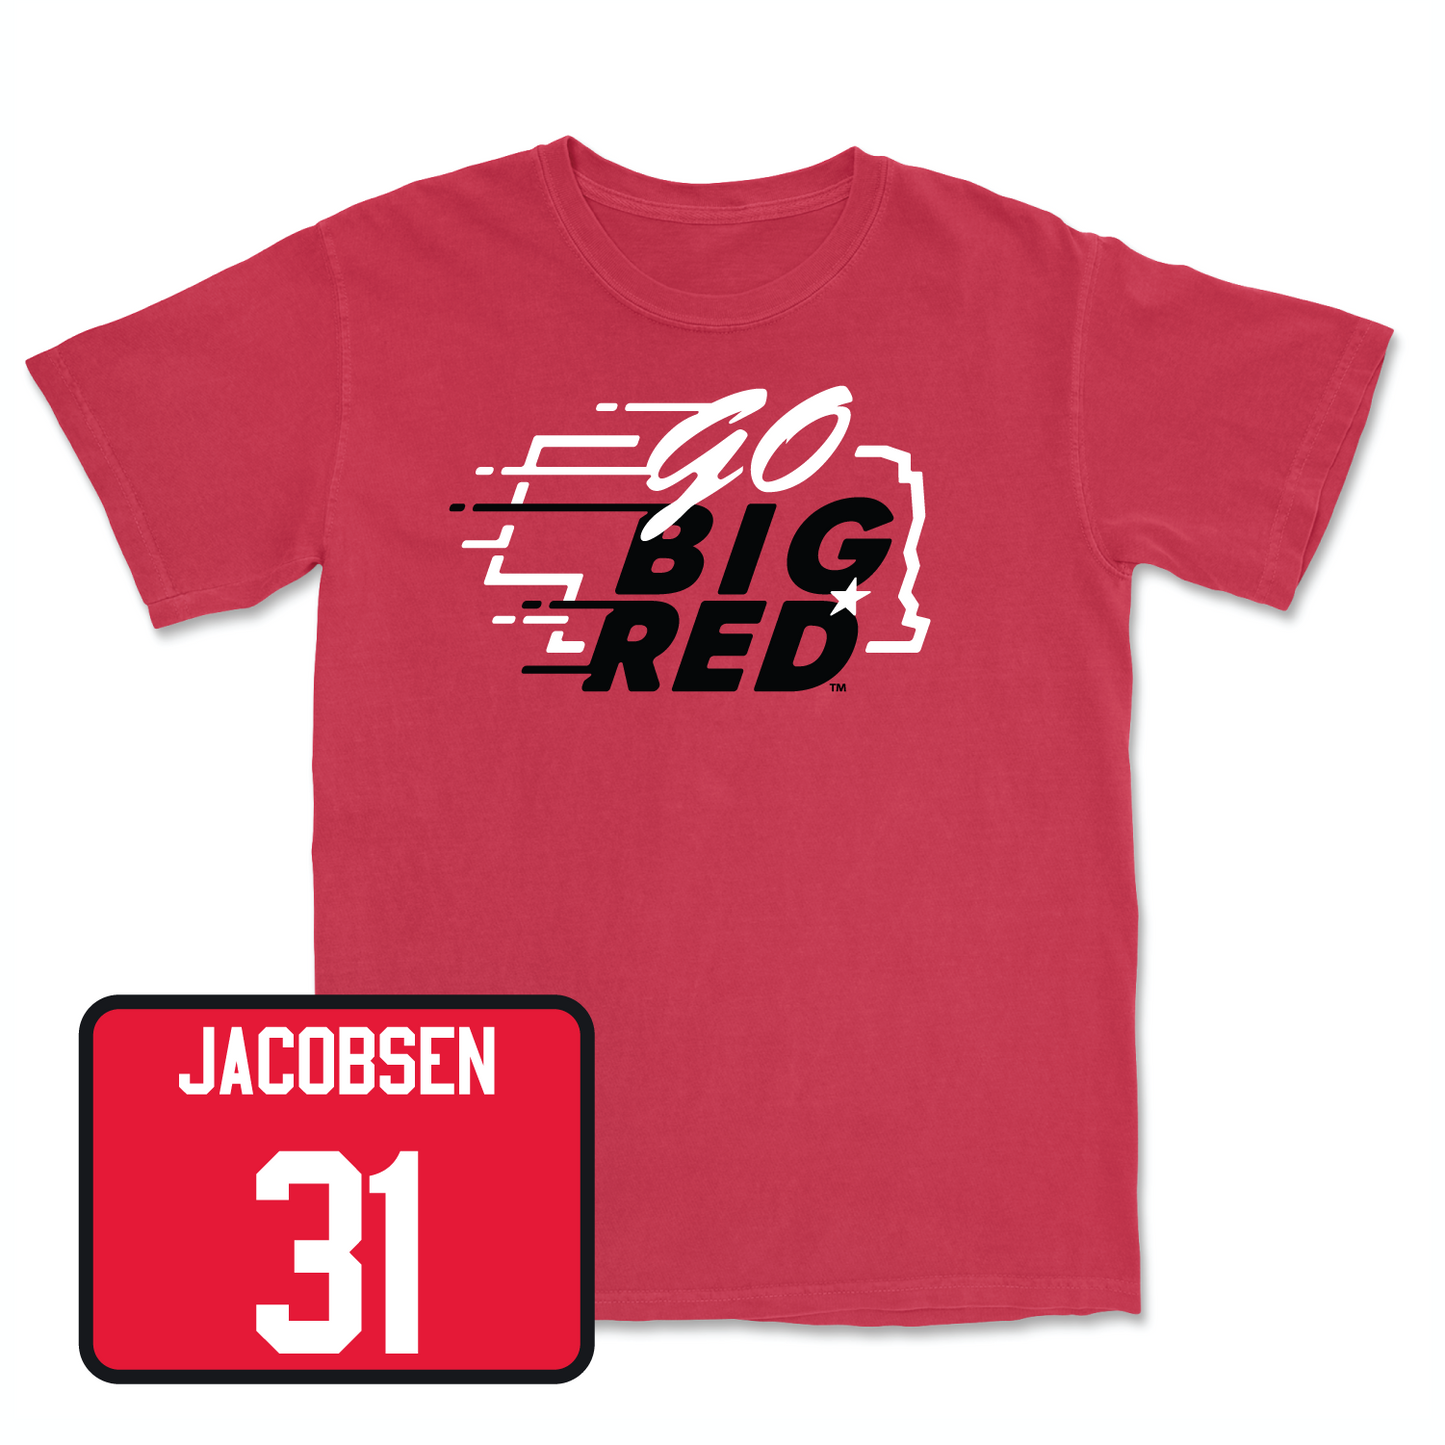 Red Men's Basketball GBR Tee Small / Cale Jacobsen | #31